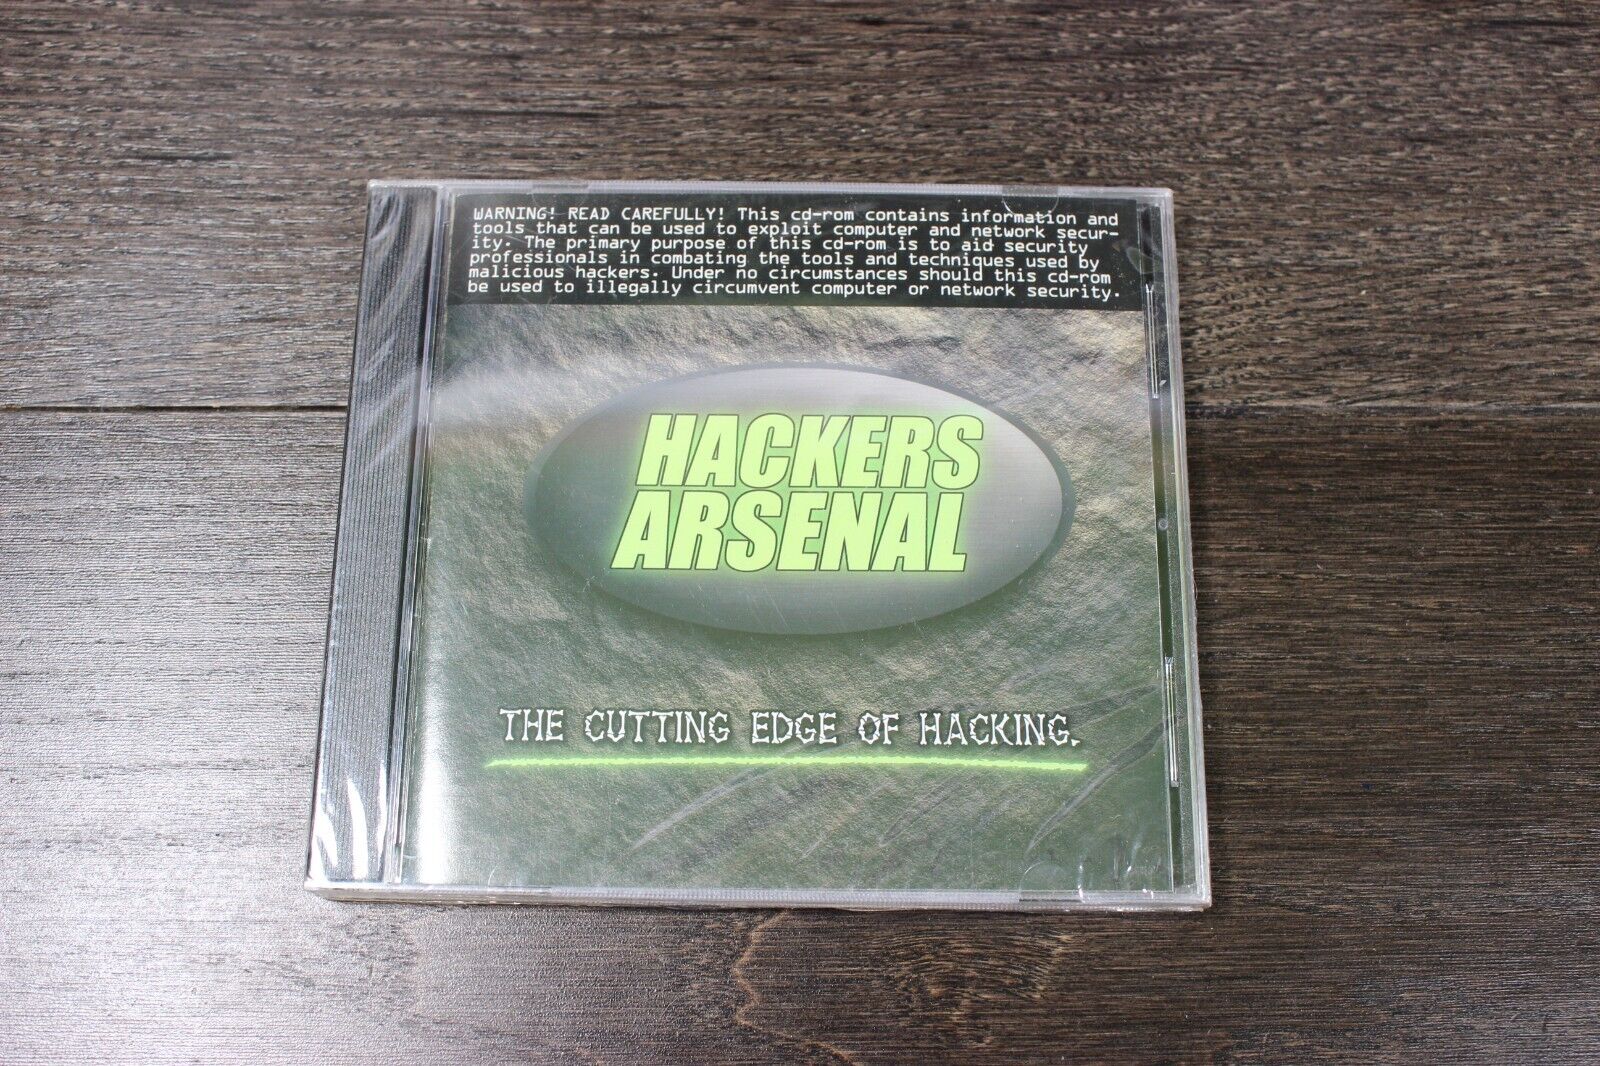 2002 2003 Hackers Arsenal The Cutting Edge Of Hacking CDROM For Windows 95/98